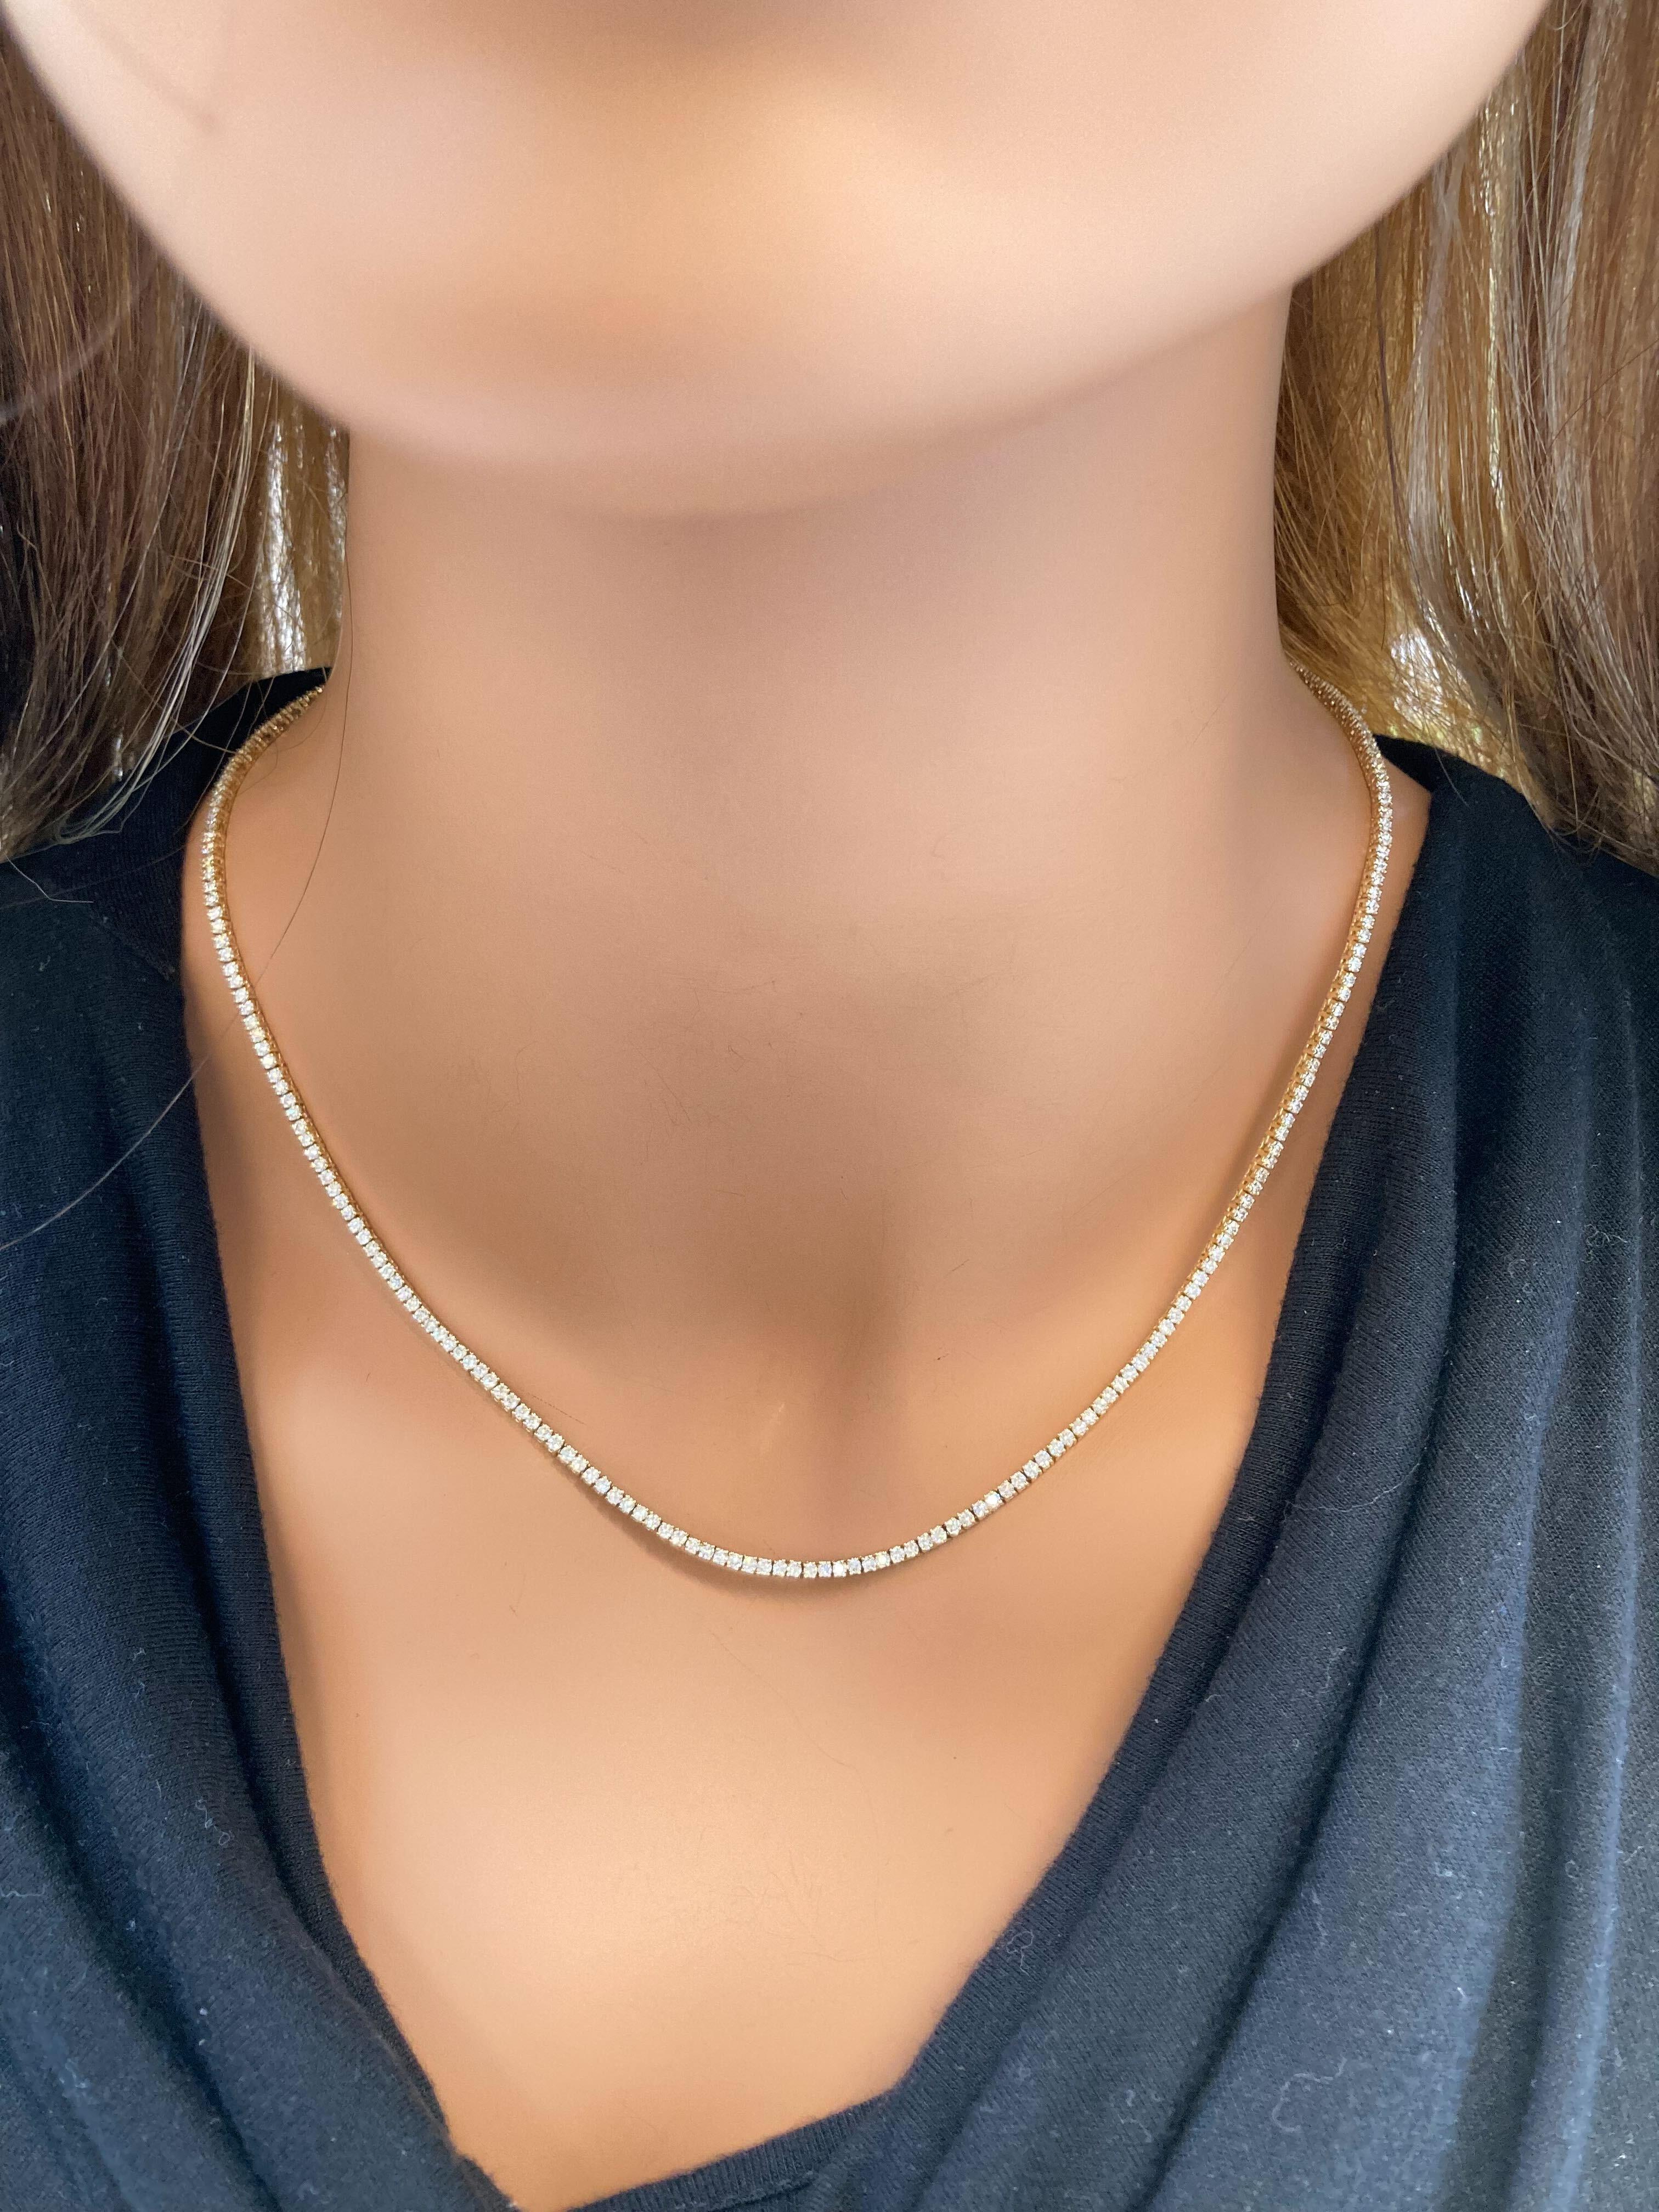 Contemporary 5.00 Carat Round Diamond Tennis Necklaces In 14k Yellow Gold For Sale